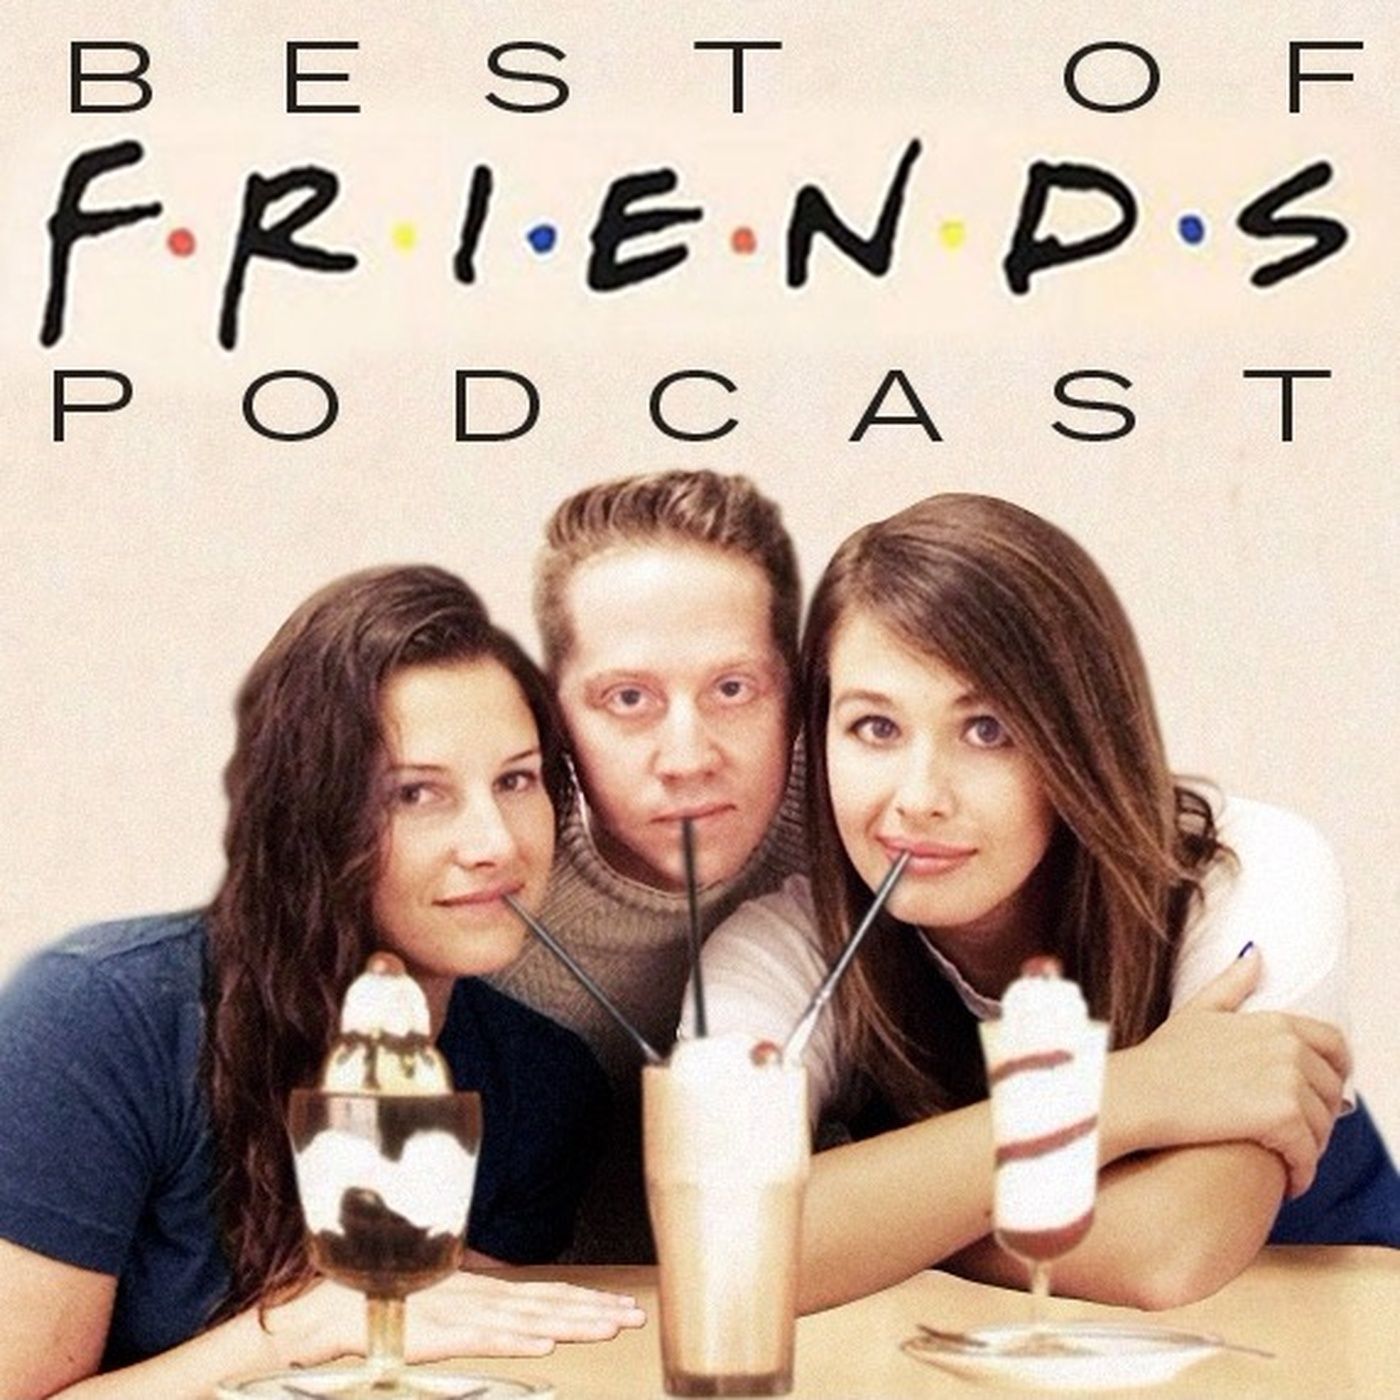 Episode 33: The One With The Fake Boob Diner